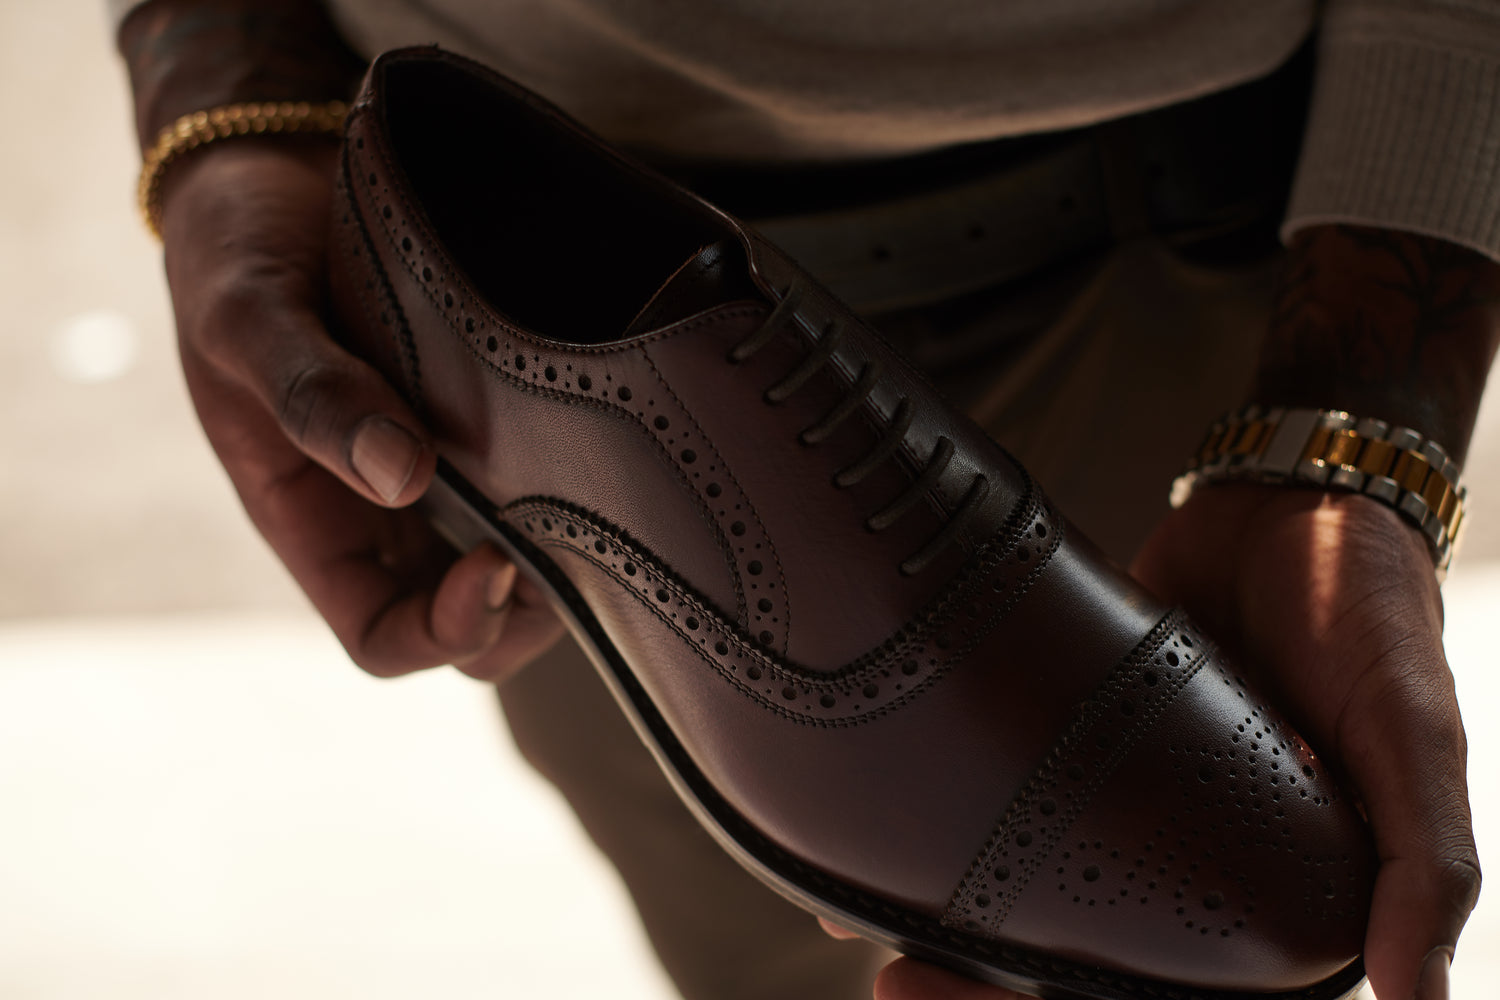 Forbes: 10 Of The Most Comfortable Dress Shoes For Men